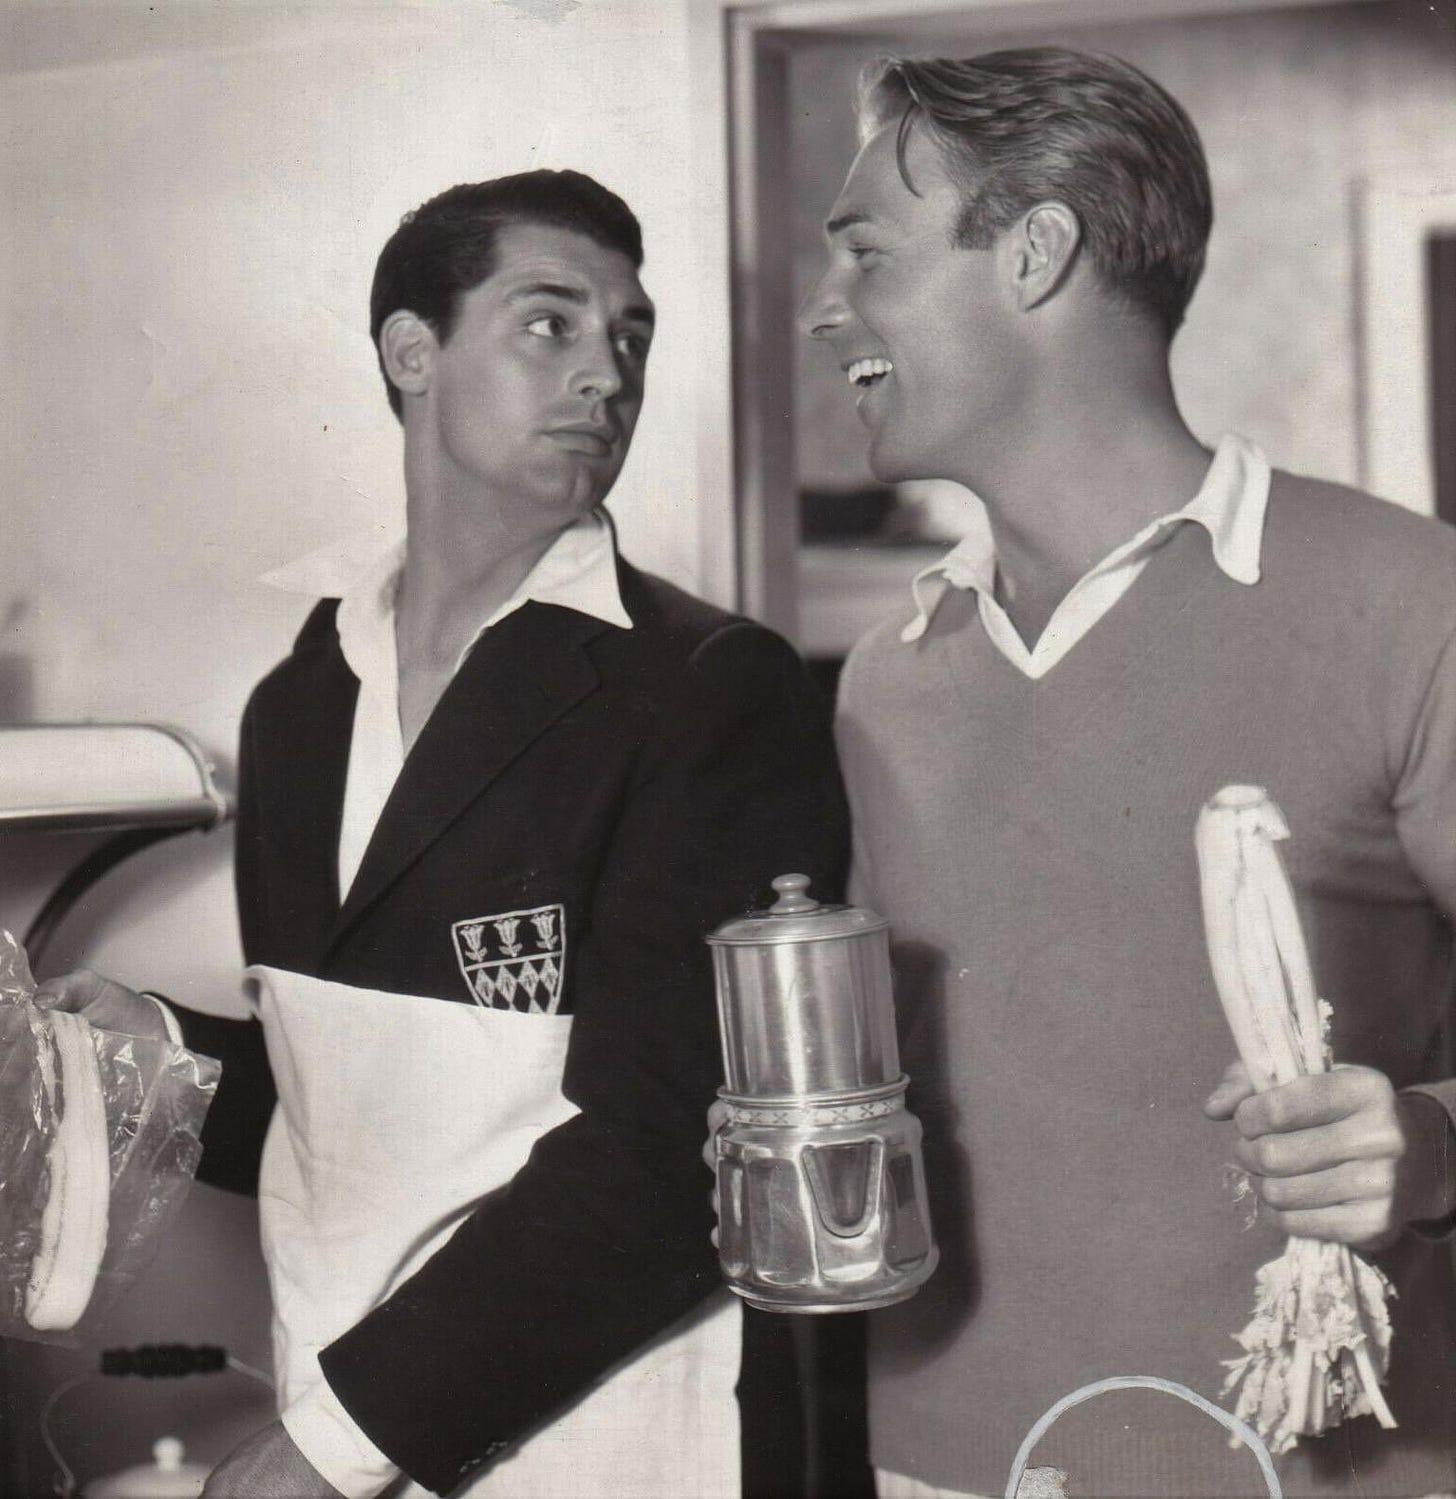 Cary Grant & Randolph Scott in their shared home in the 1930s.